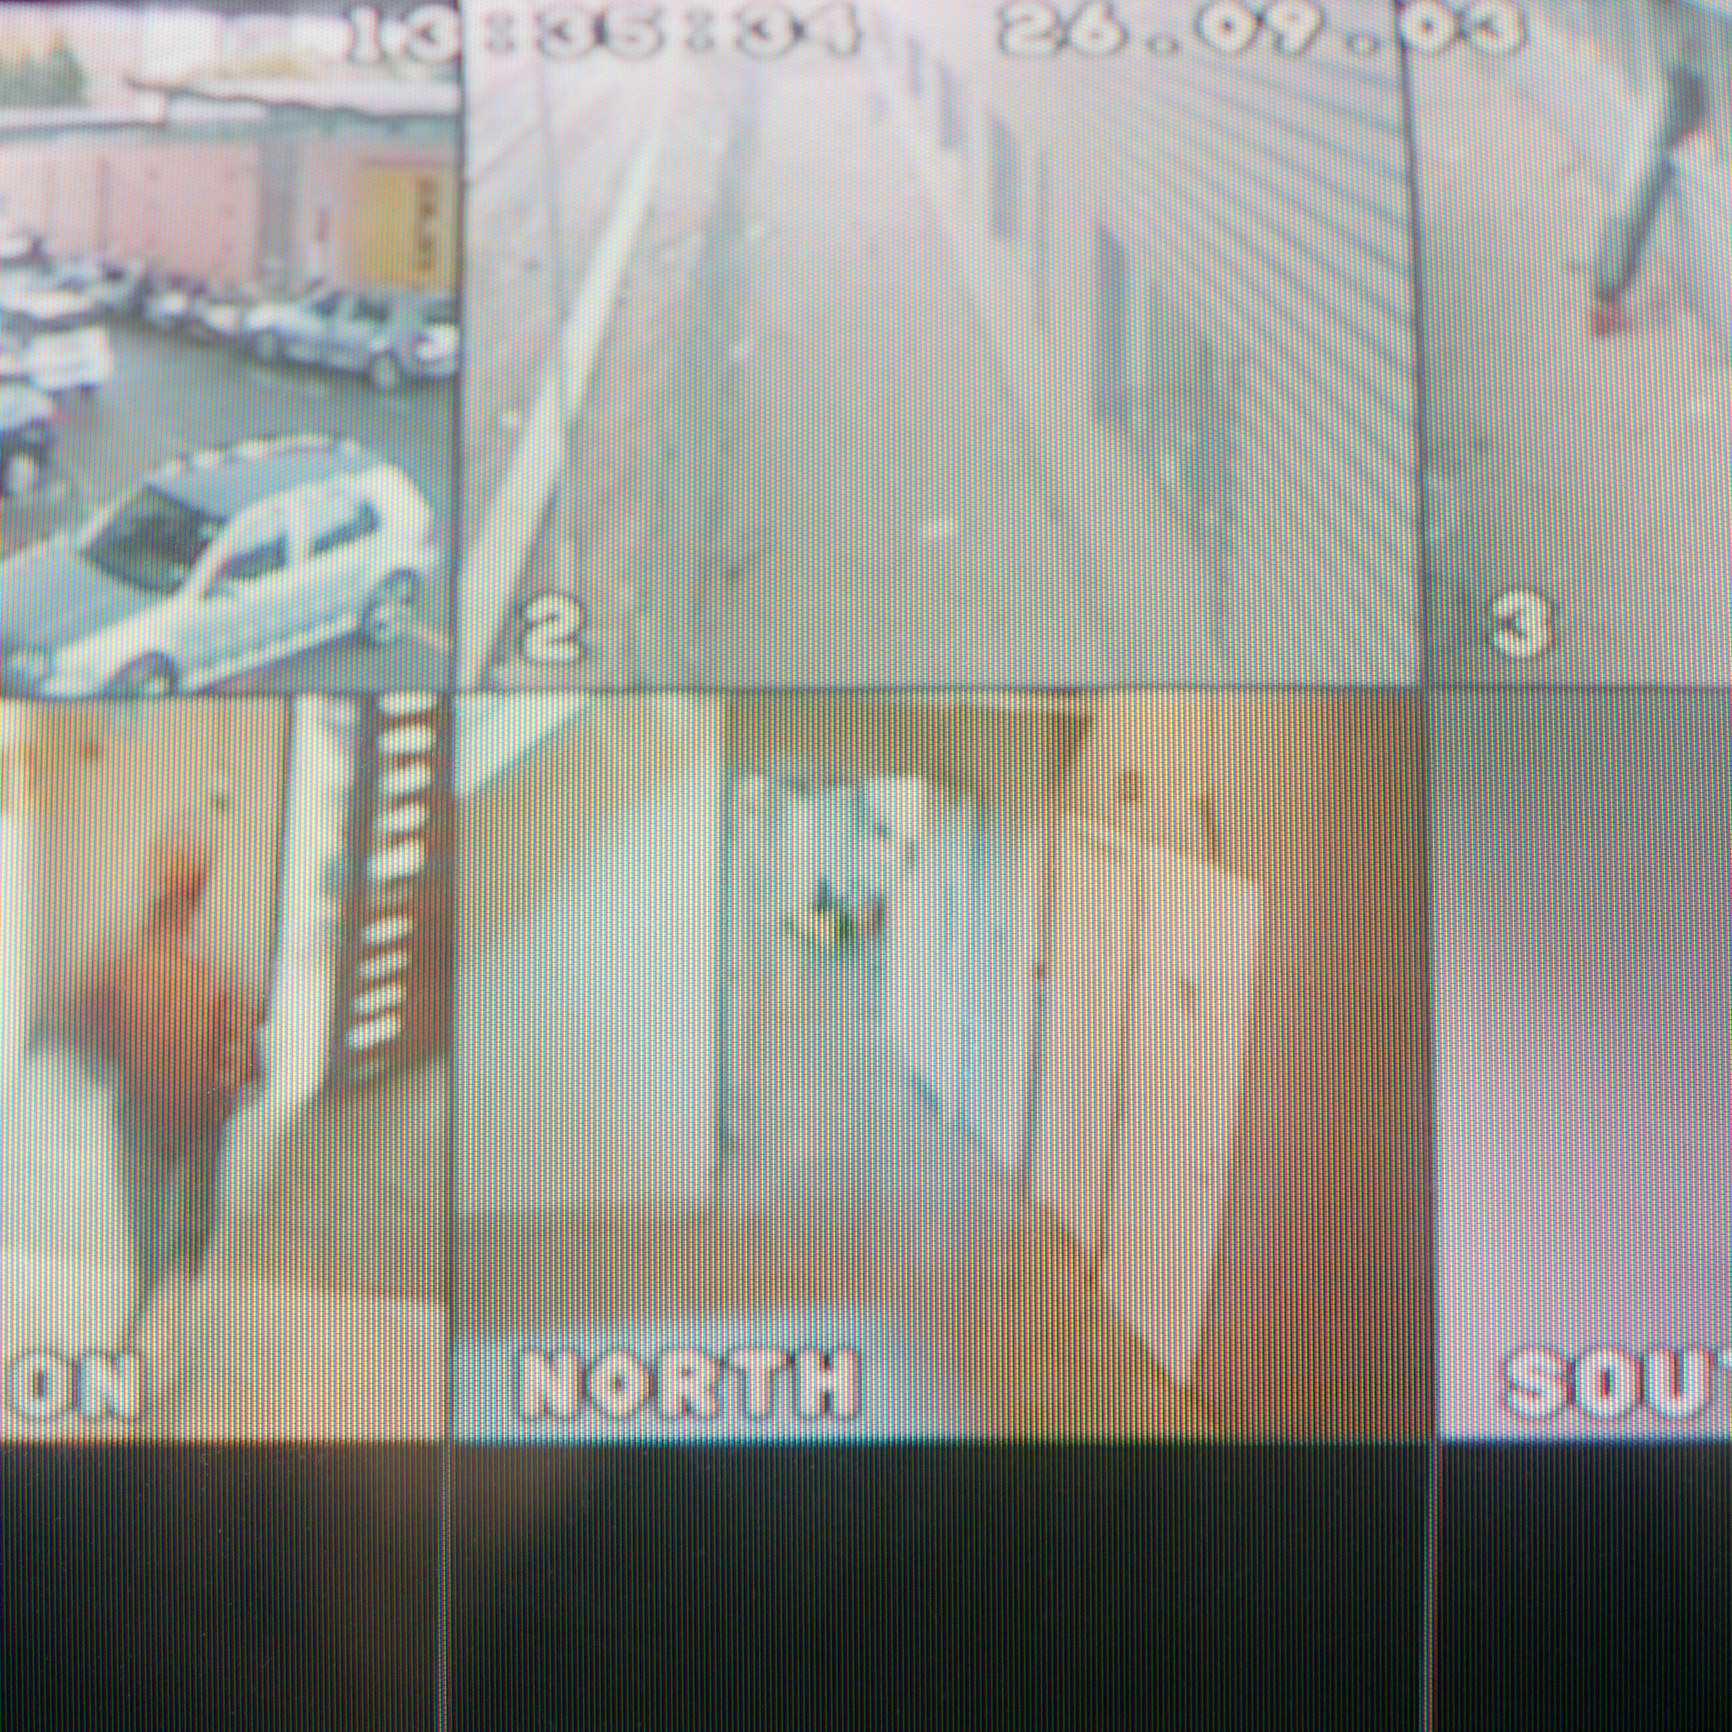 security camera images